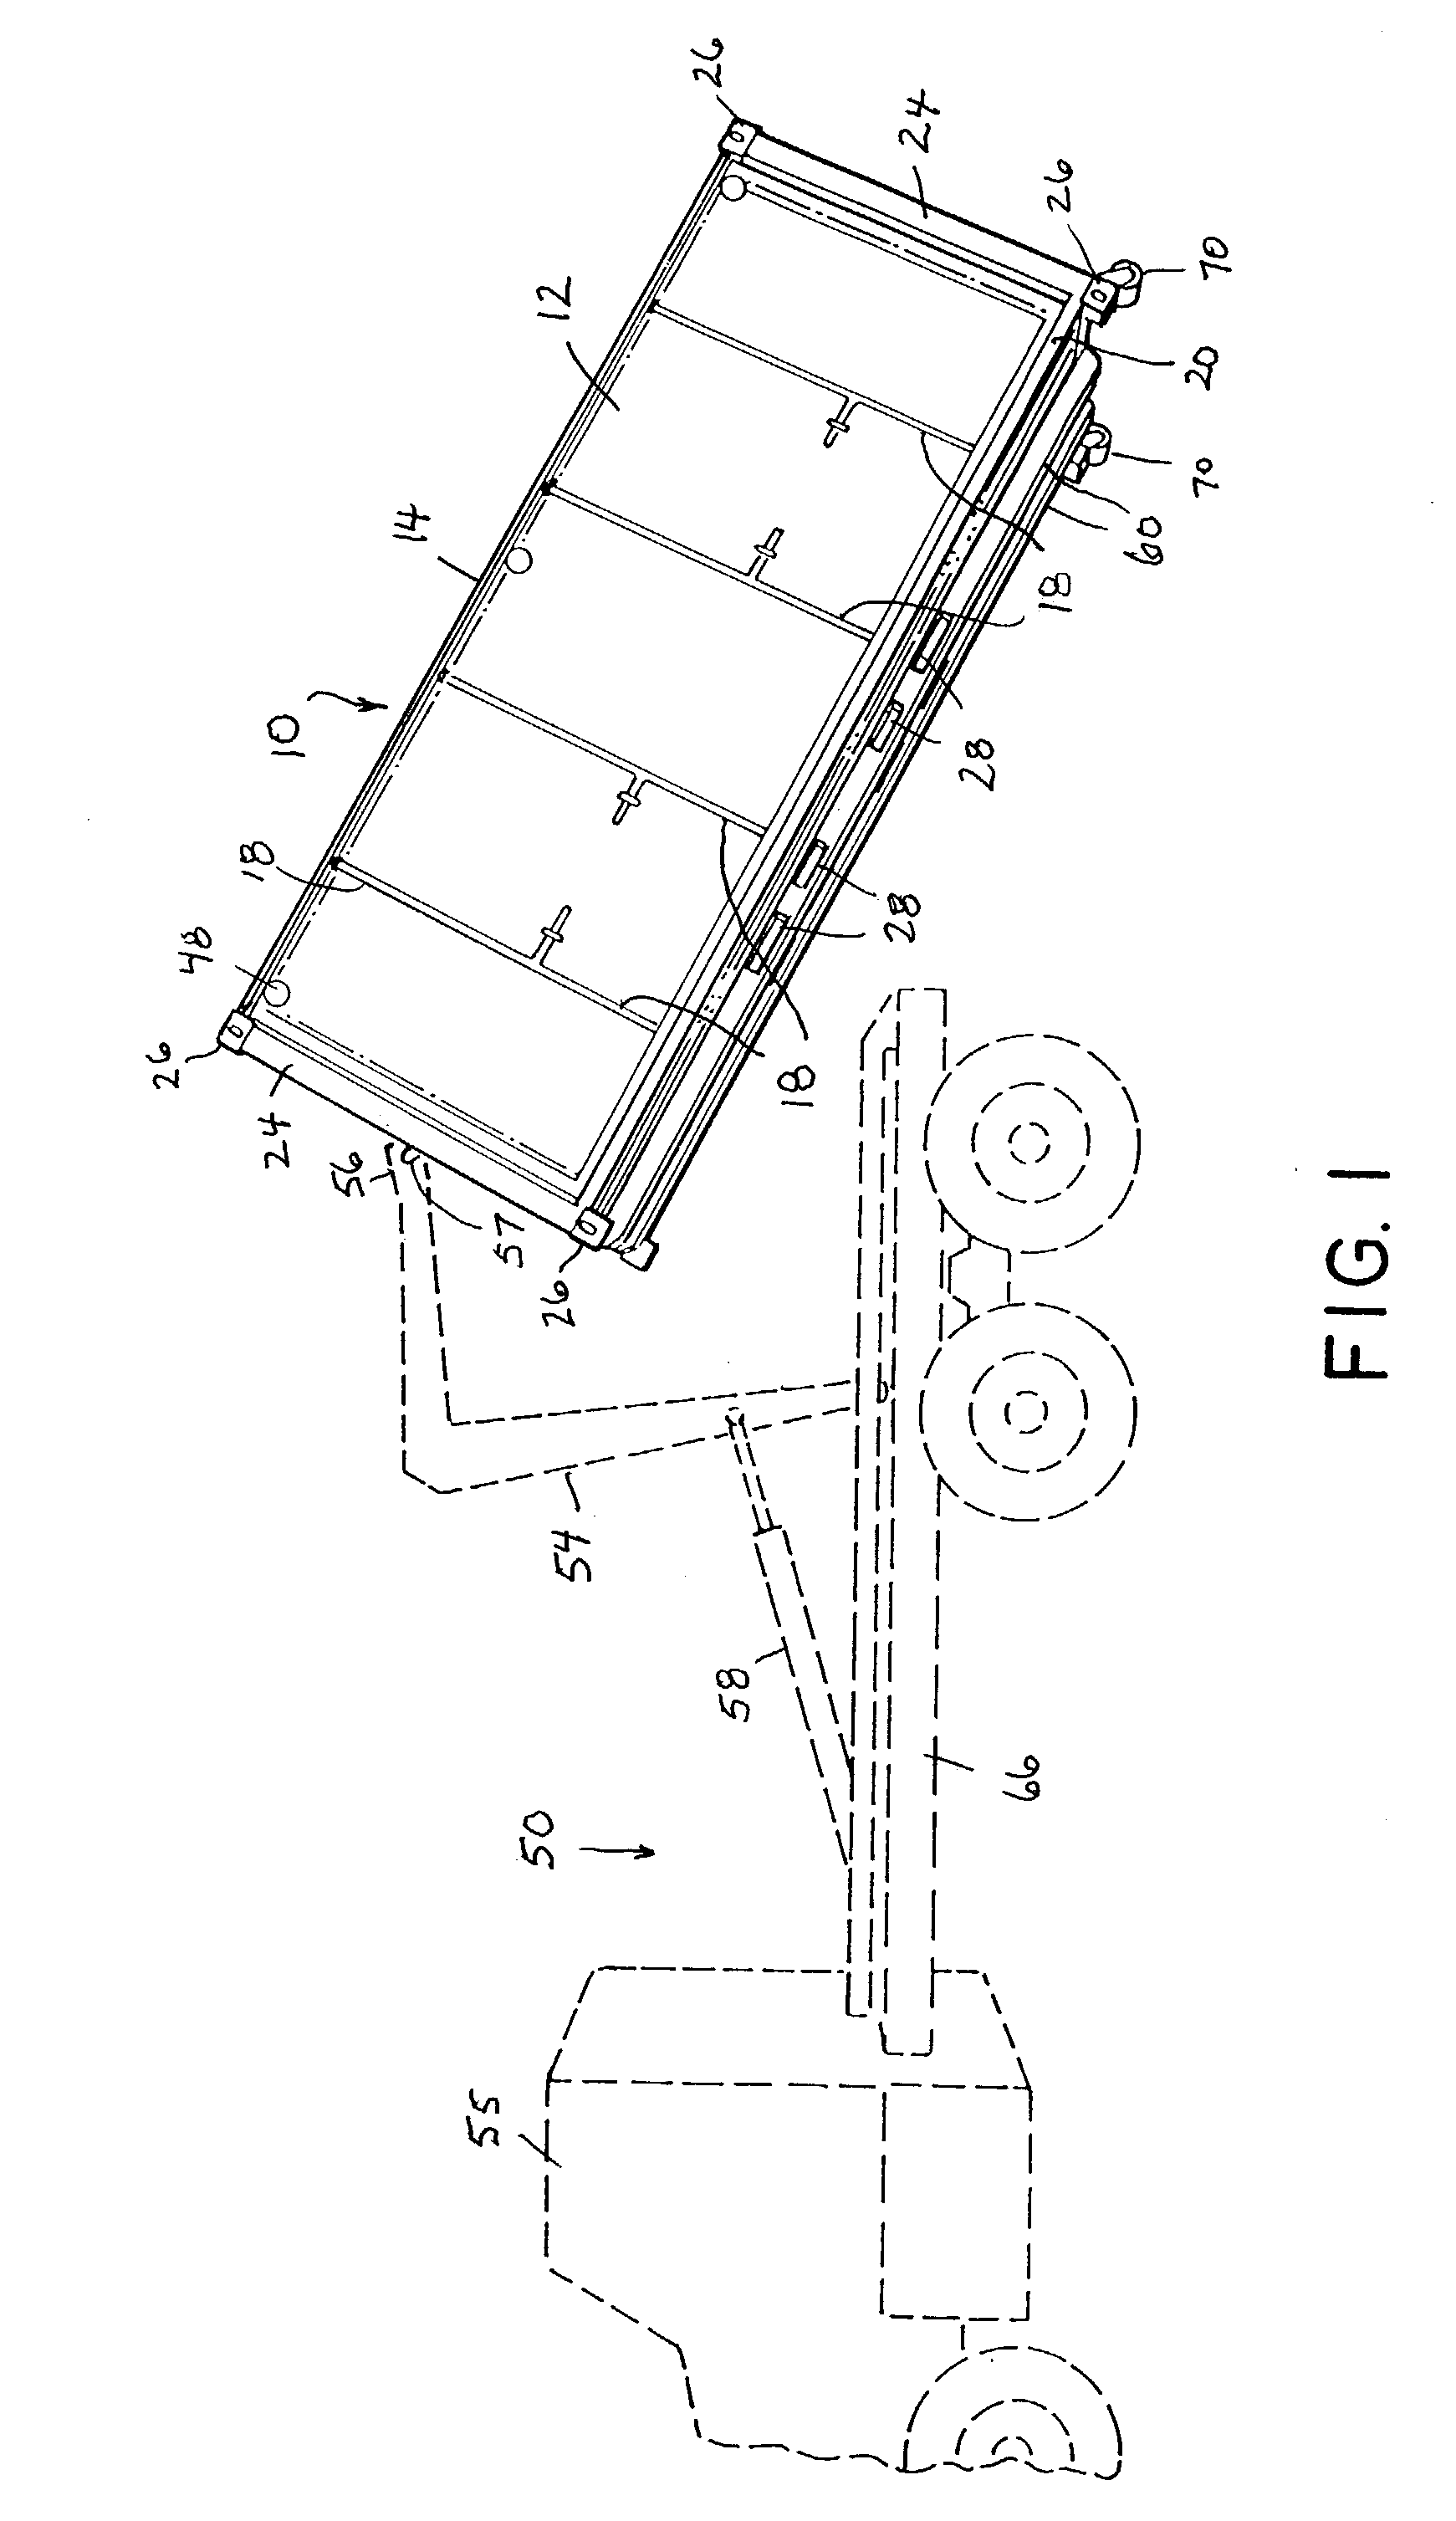 Collapsible containerized shelter transportable by self-loading vehicles